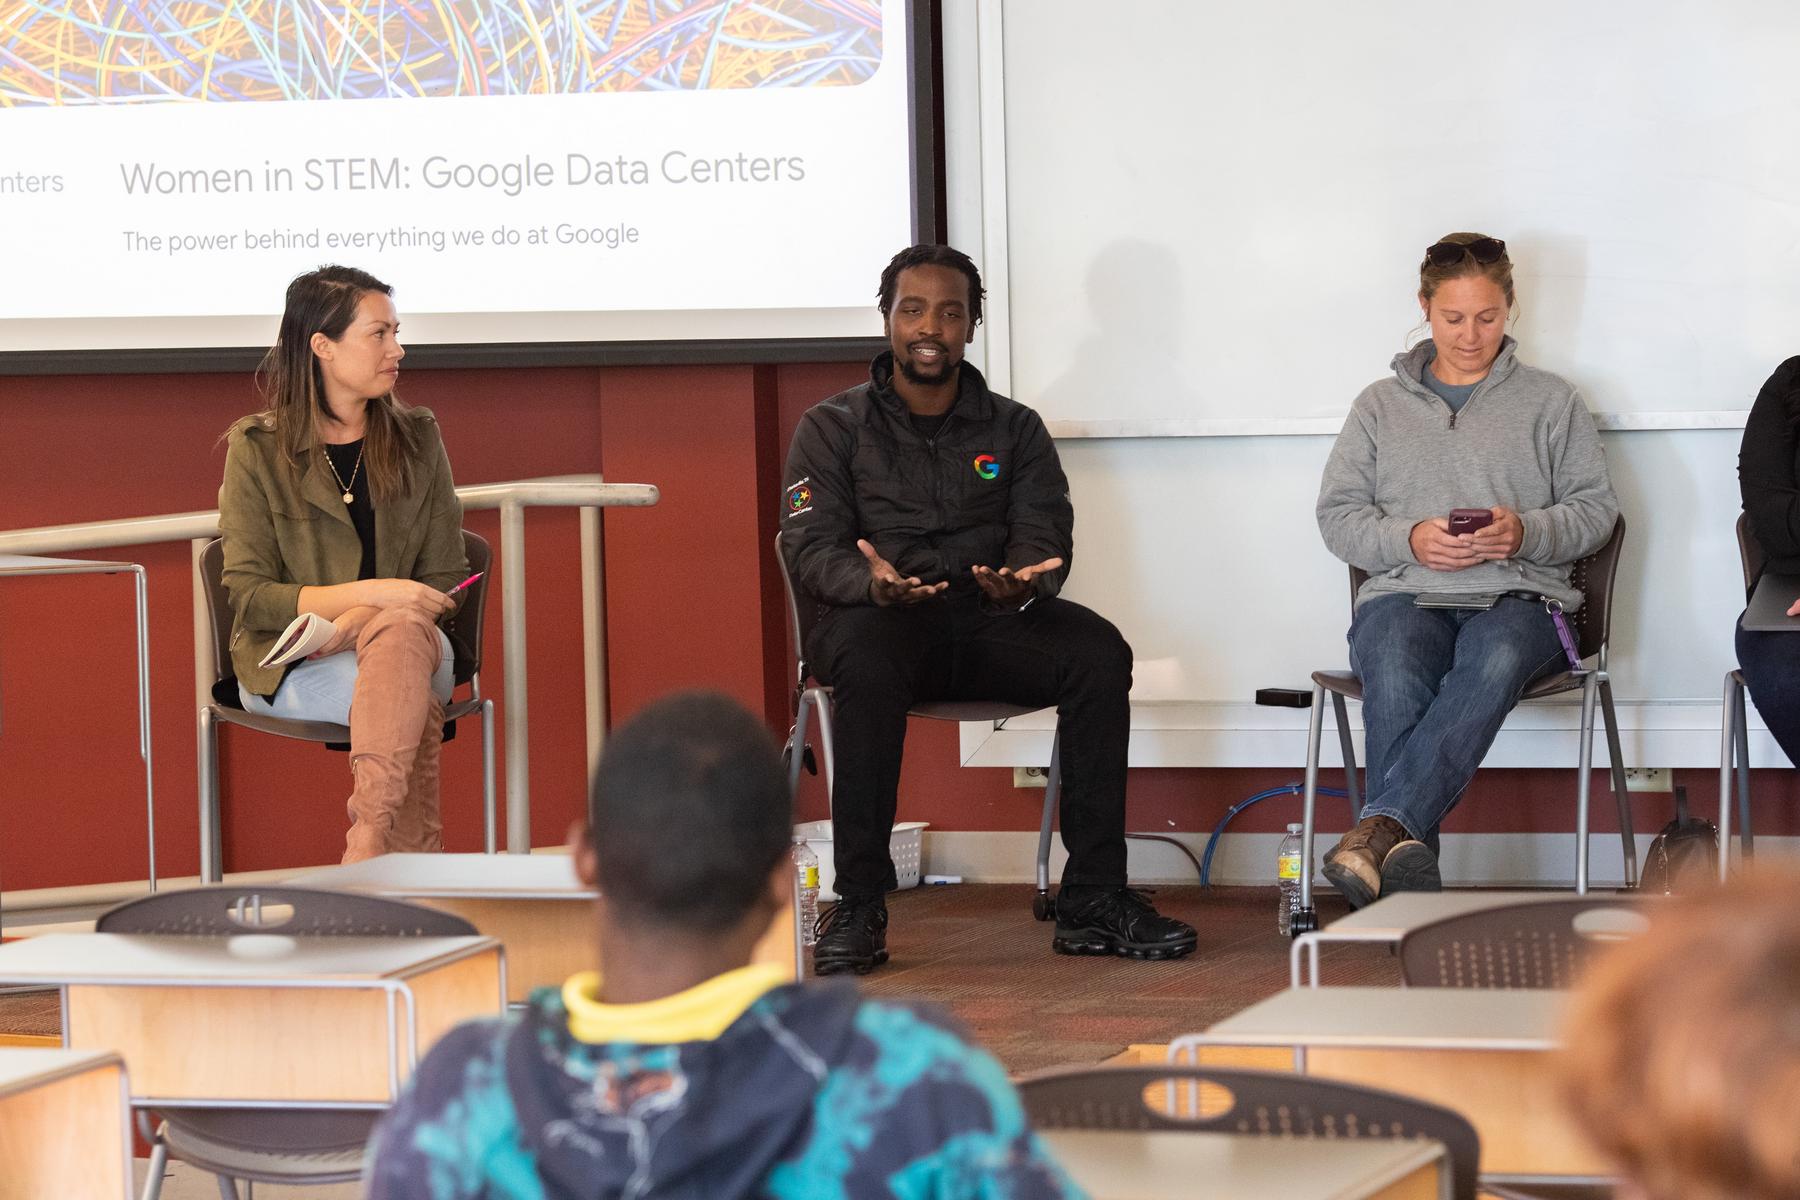 The College of STEM hosted a panel discussion of Google representatives in celebration of “Women in Technology” on Wednesday, Sept. 28, in the Maynard Mathematics and Computer Science Building.